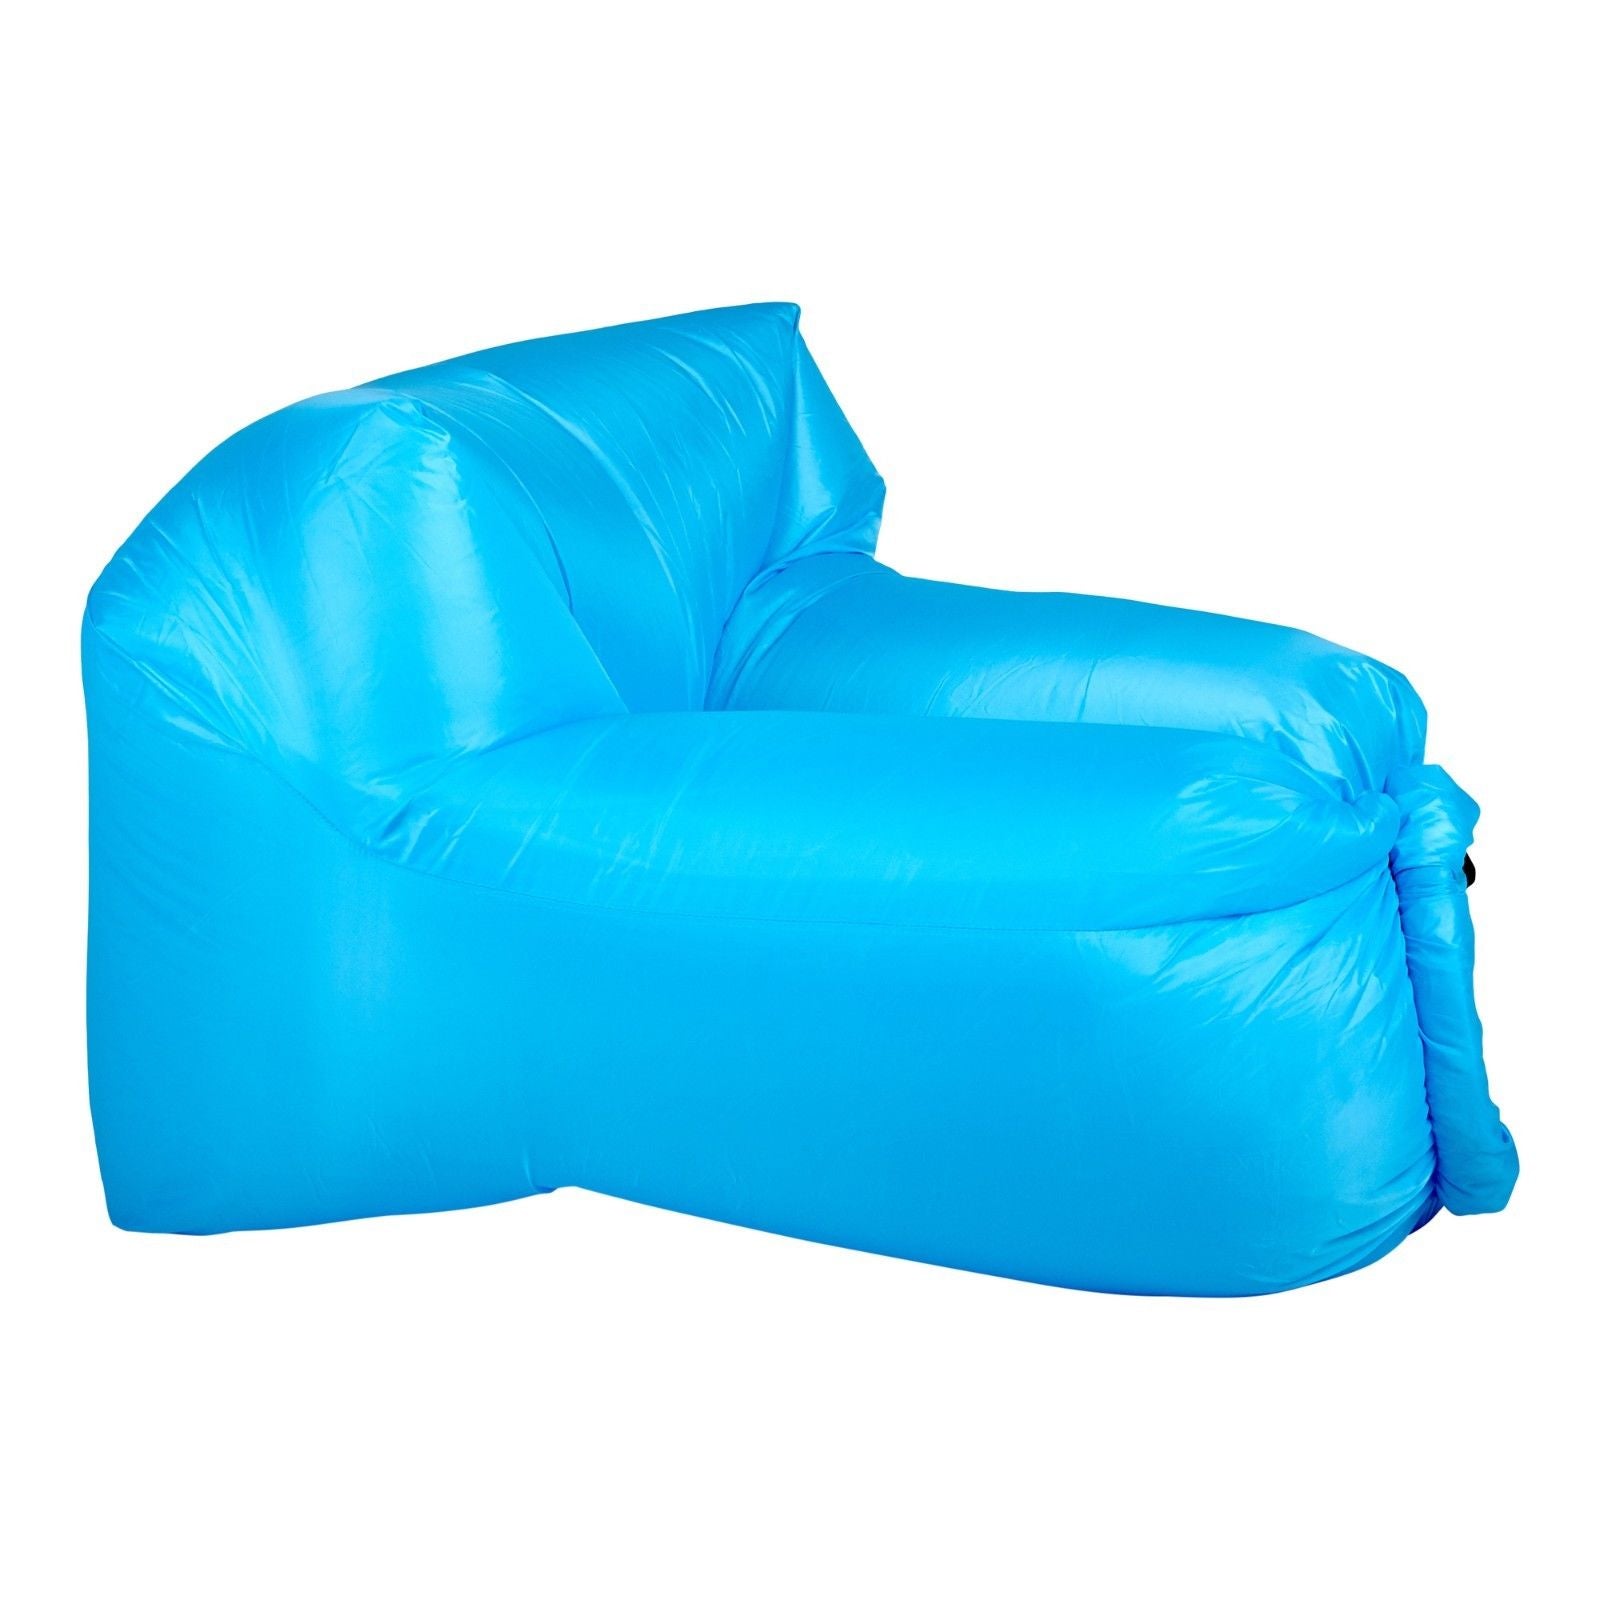 Milano Decor Inflatable Air Lounger for Beach Camping Festival Outdoor Lazy Lounge Chair-Occasional Chairs-PEROZ Accessories